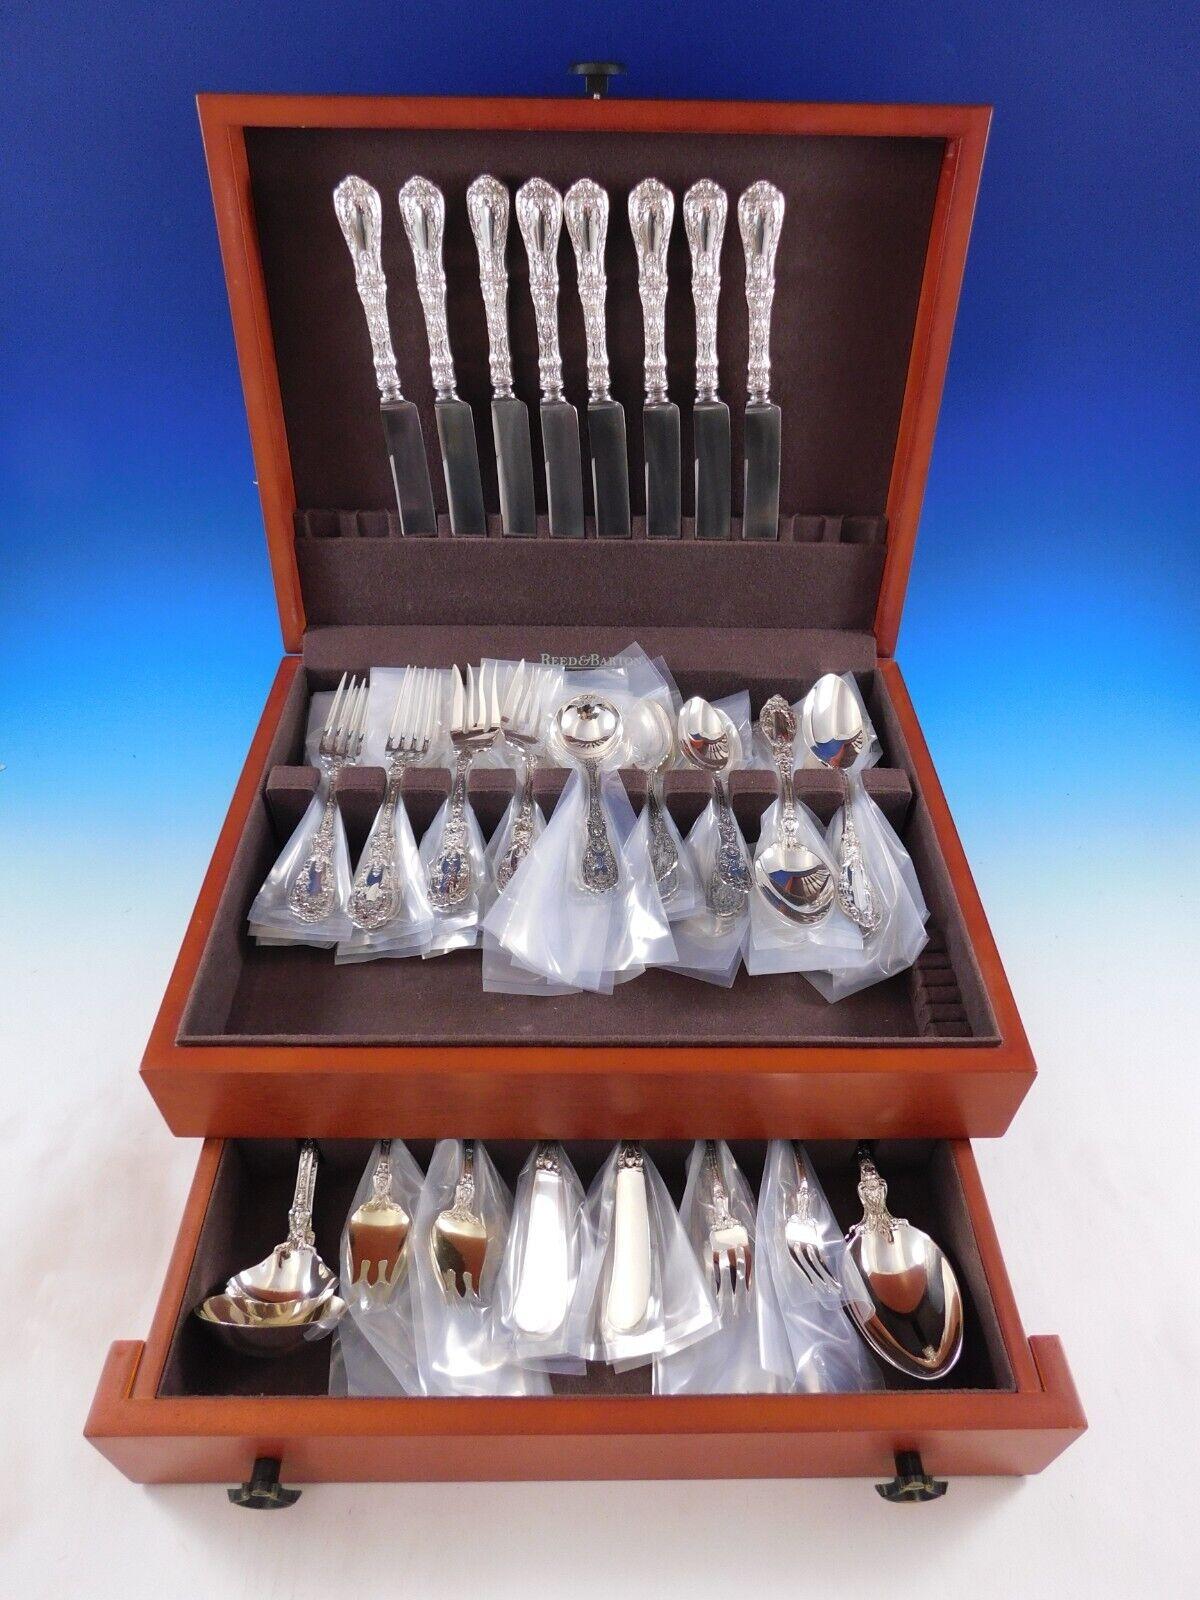 Gorgeous Paris by Gorham Sterling Silver flatware set, 76 pieces. Paris is an Art Nouveau style multi-motif pattern with two full figure cherubs facing each other with a floral arrangement between them. This set includes:

8 Dinner Knives, 9 7/8